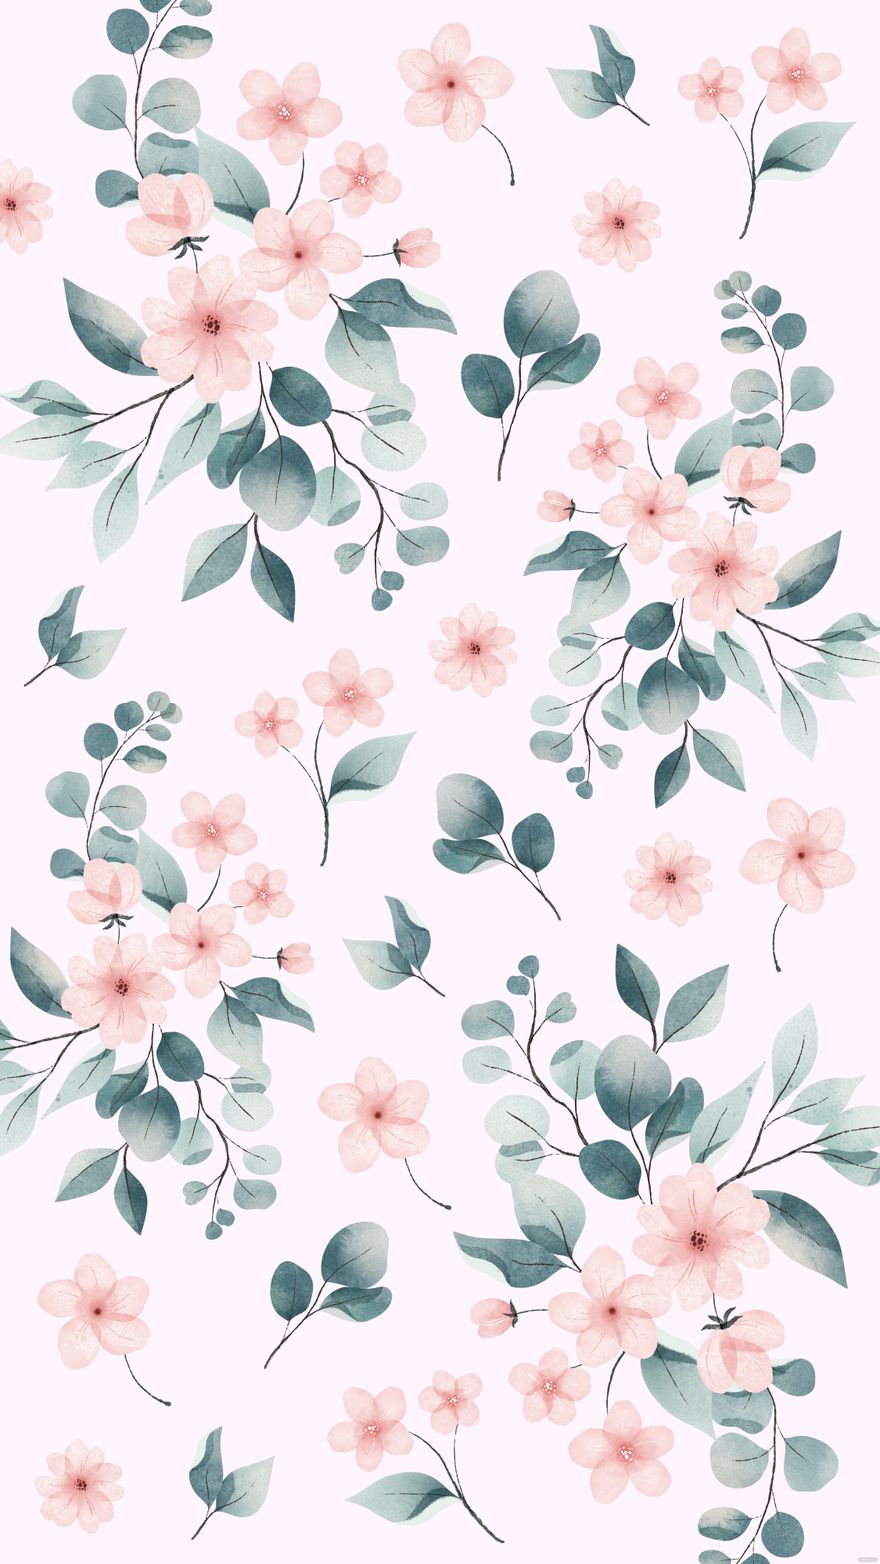 Floral Background - Images, HD, Free, Download 